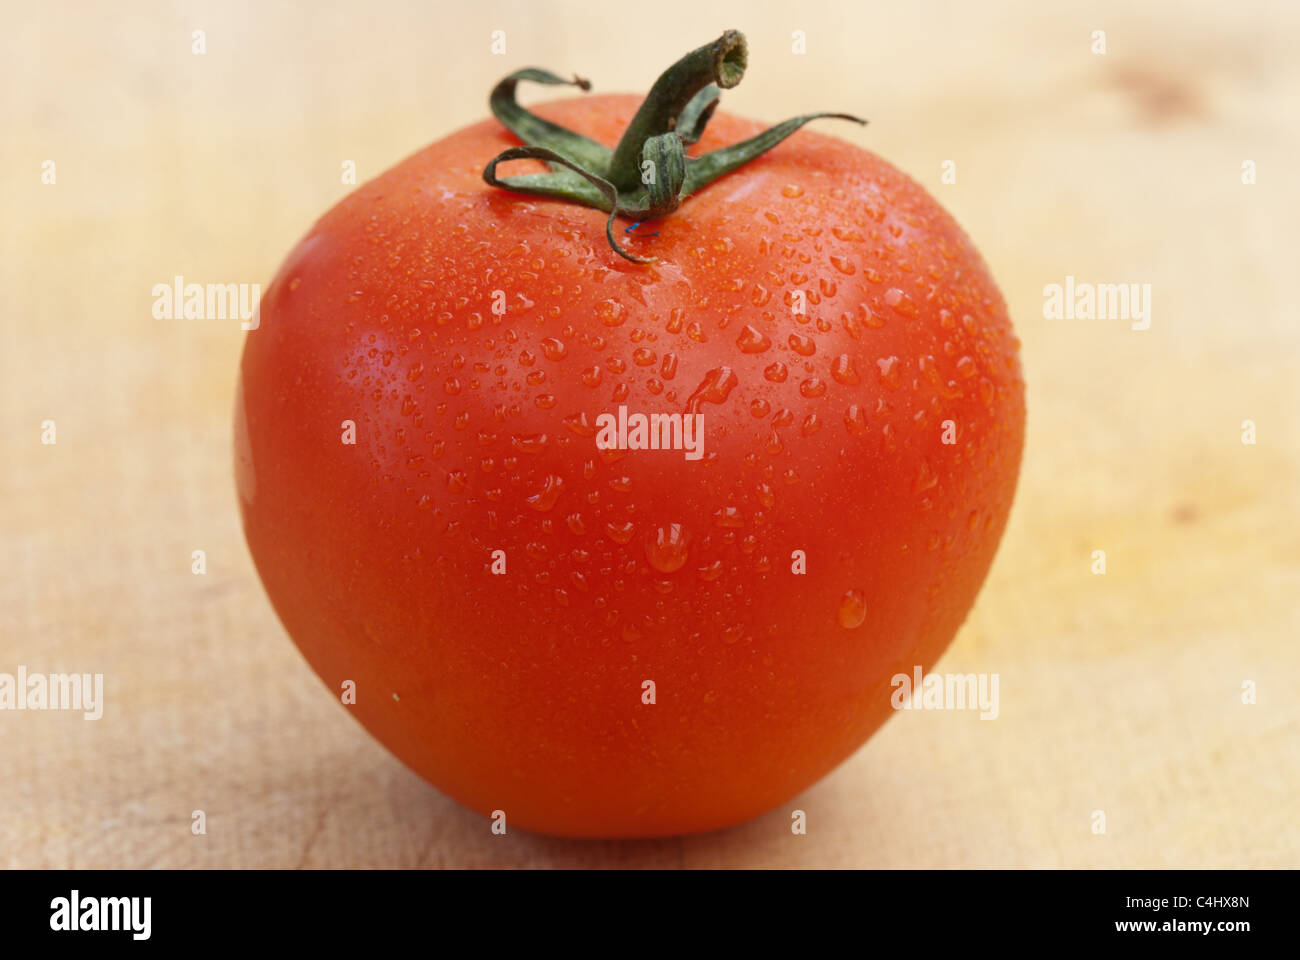 Whole tomato on a wooden board Stock Photo